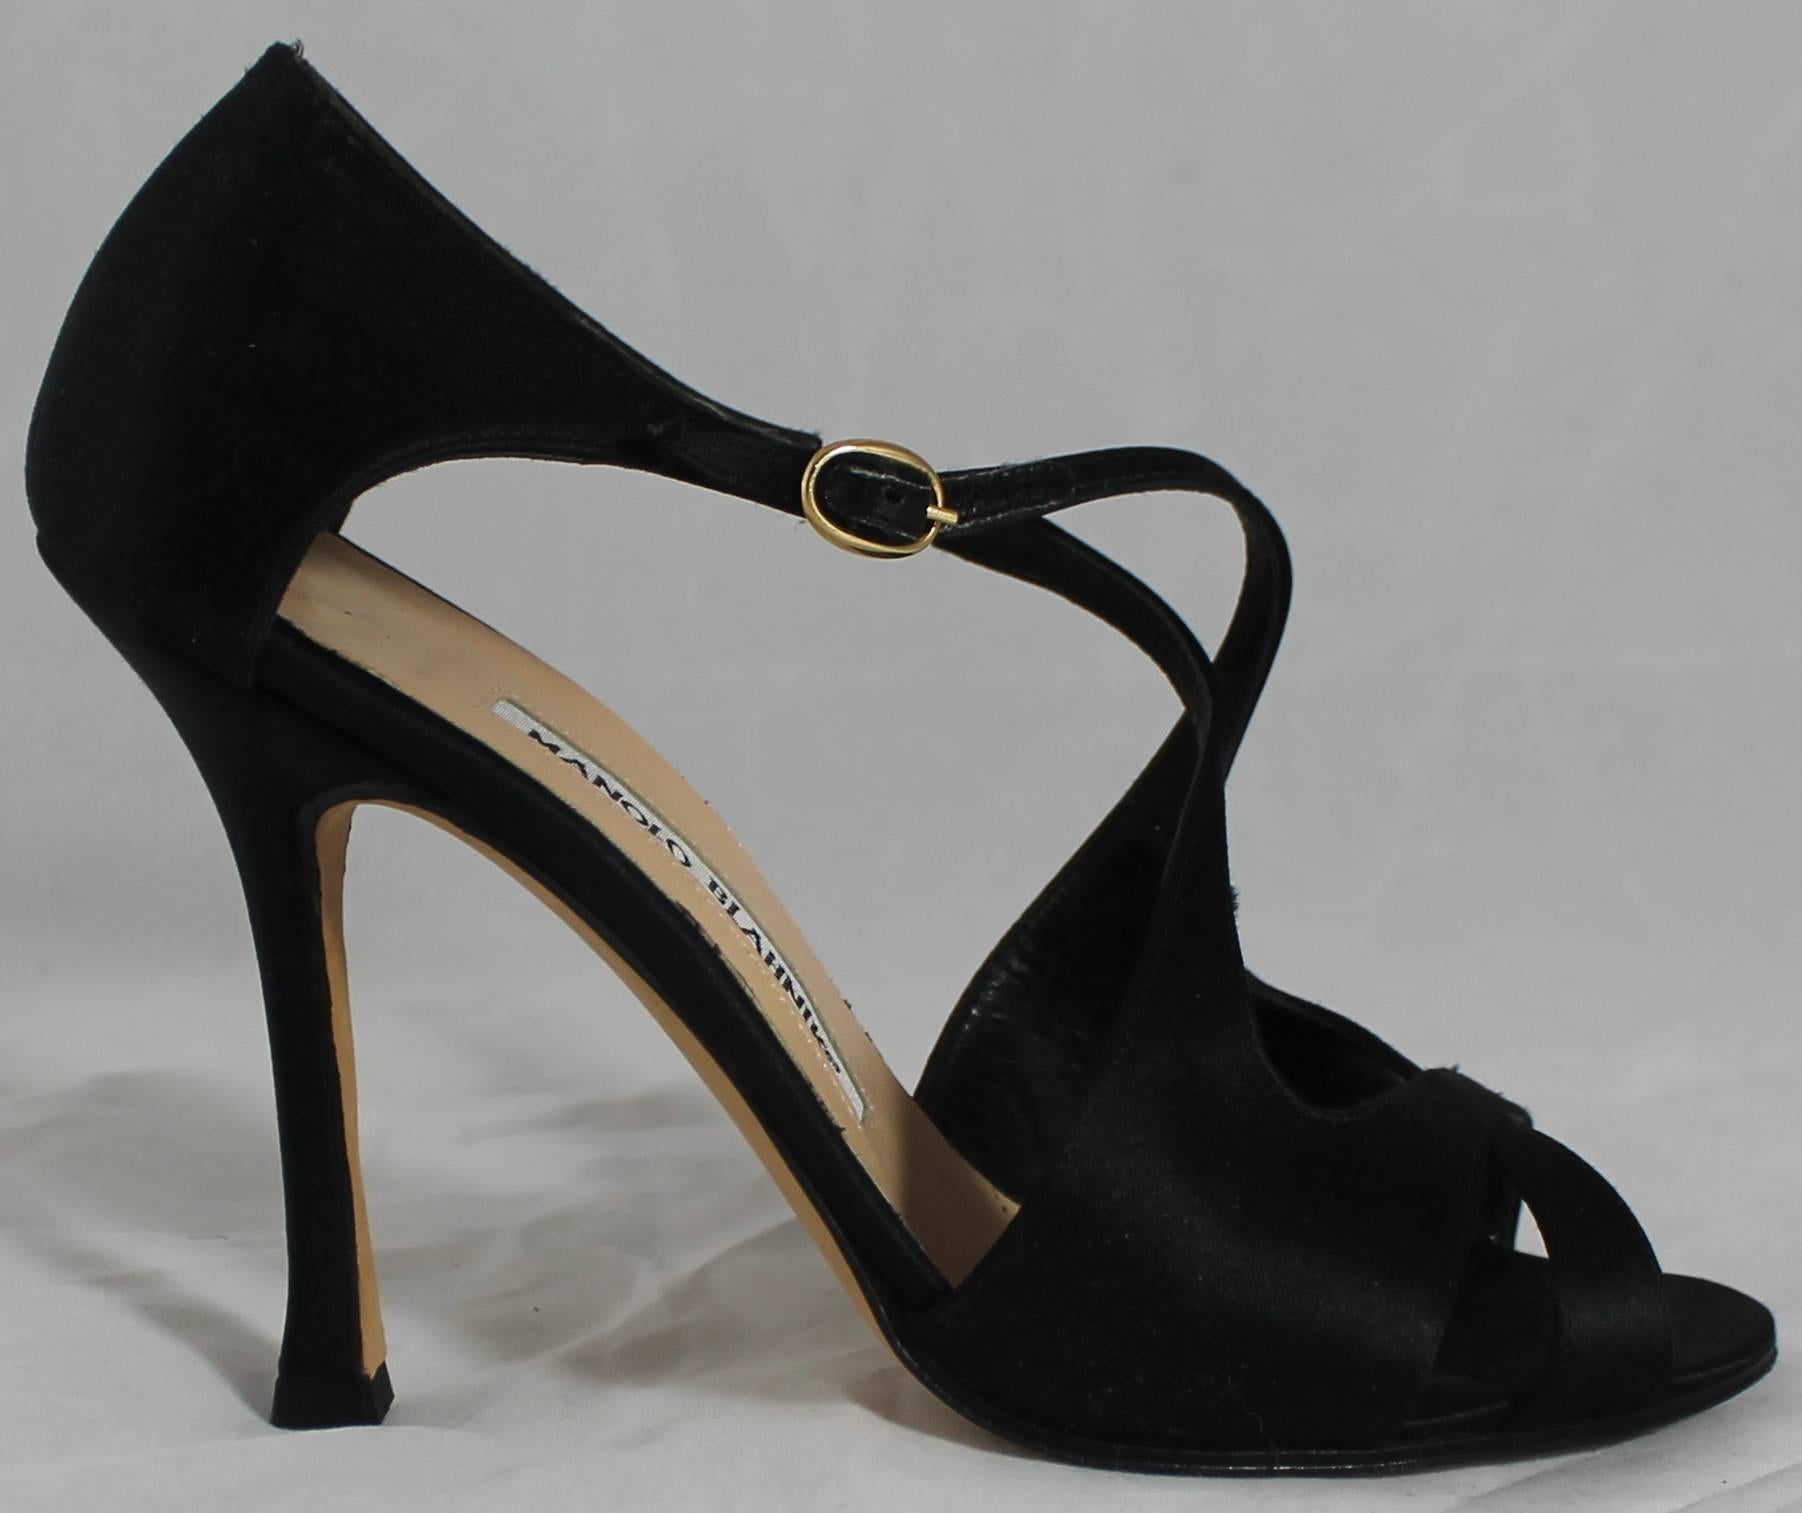 Manolo Blahnik Black Satin Strappy Heels - 36.5. These beautiful heels black satin with criss-crossed straps. On the ankle strap there is a gold closure. They are in very good condition with minor wear on the bottom.

Measurements:
Heel: 4